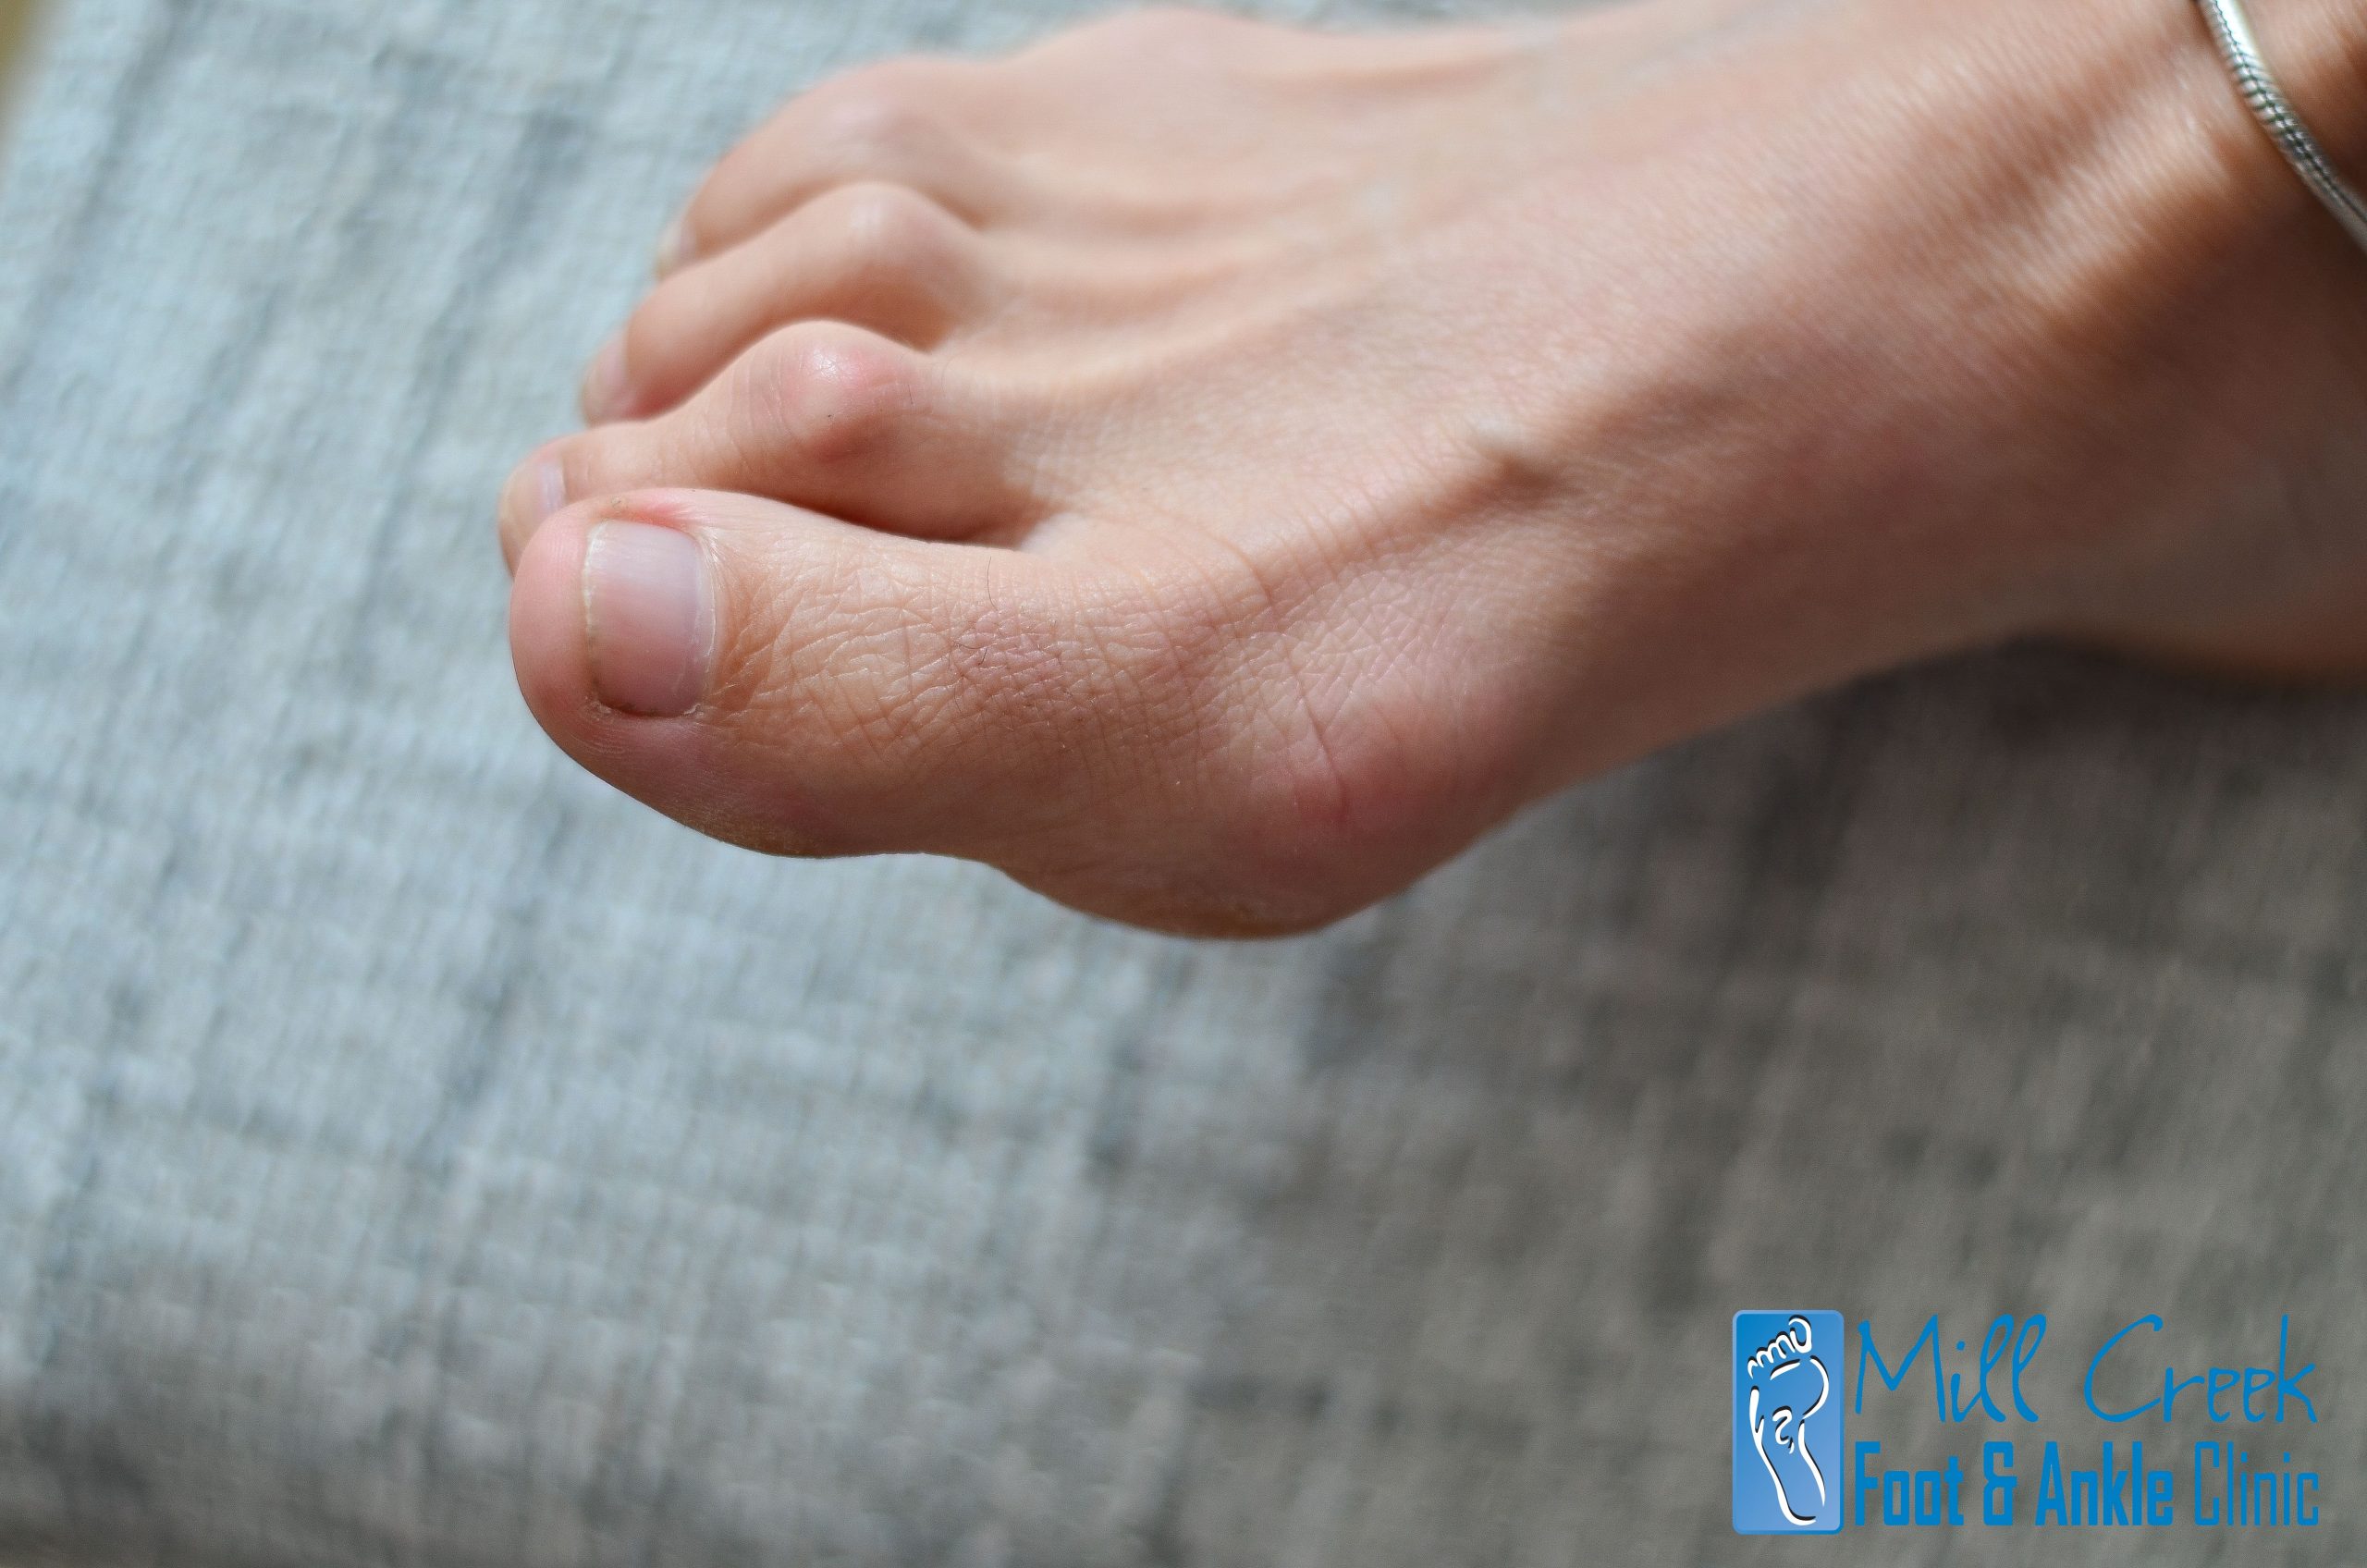 Treatment for Hammertoes - Relief at Mill Creek Foot & Ankle Clinic